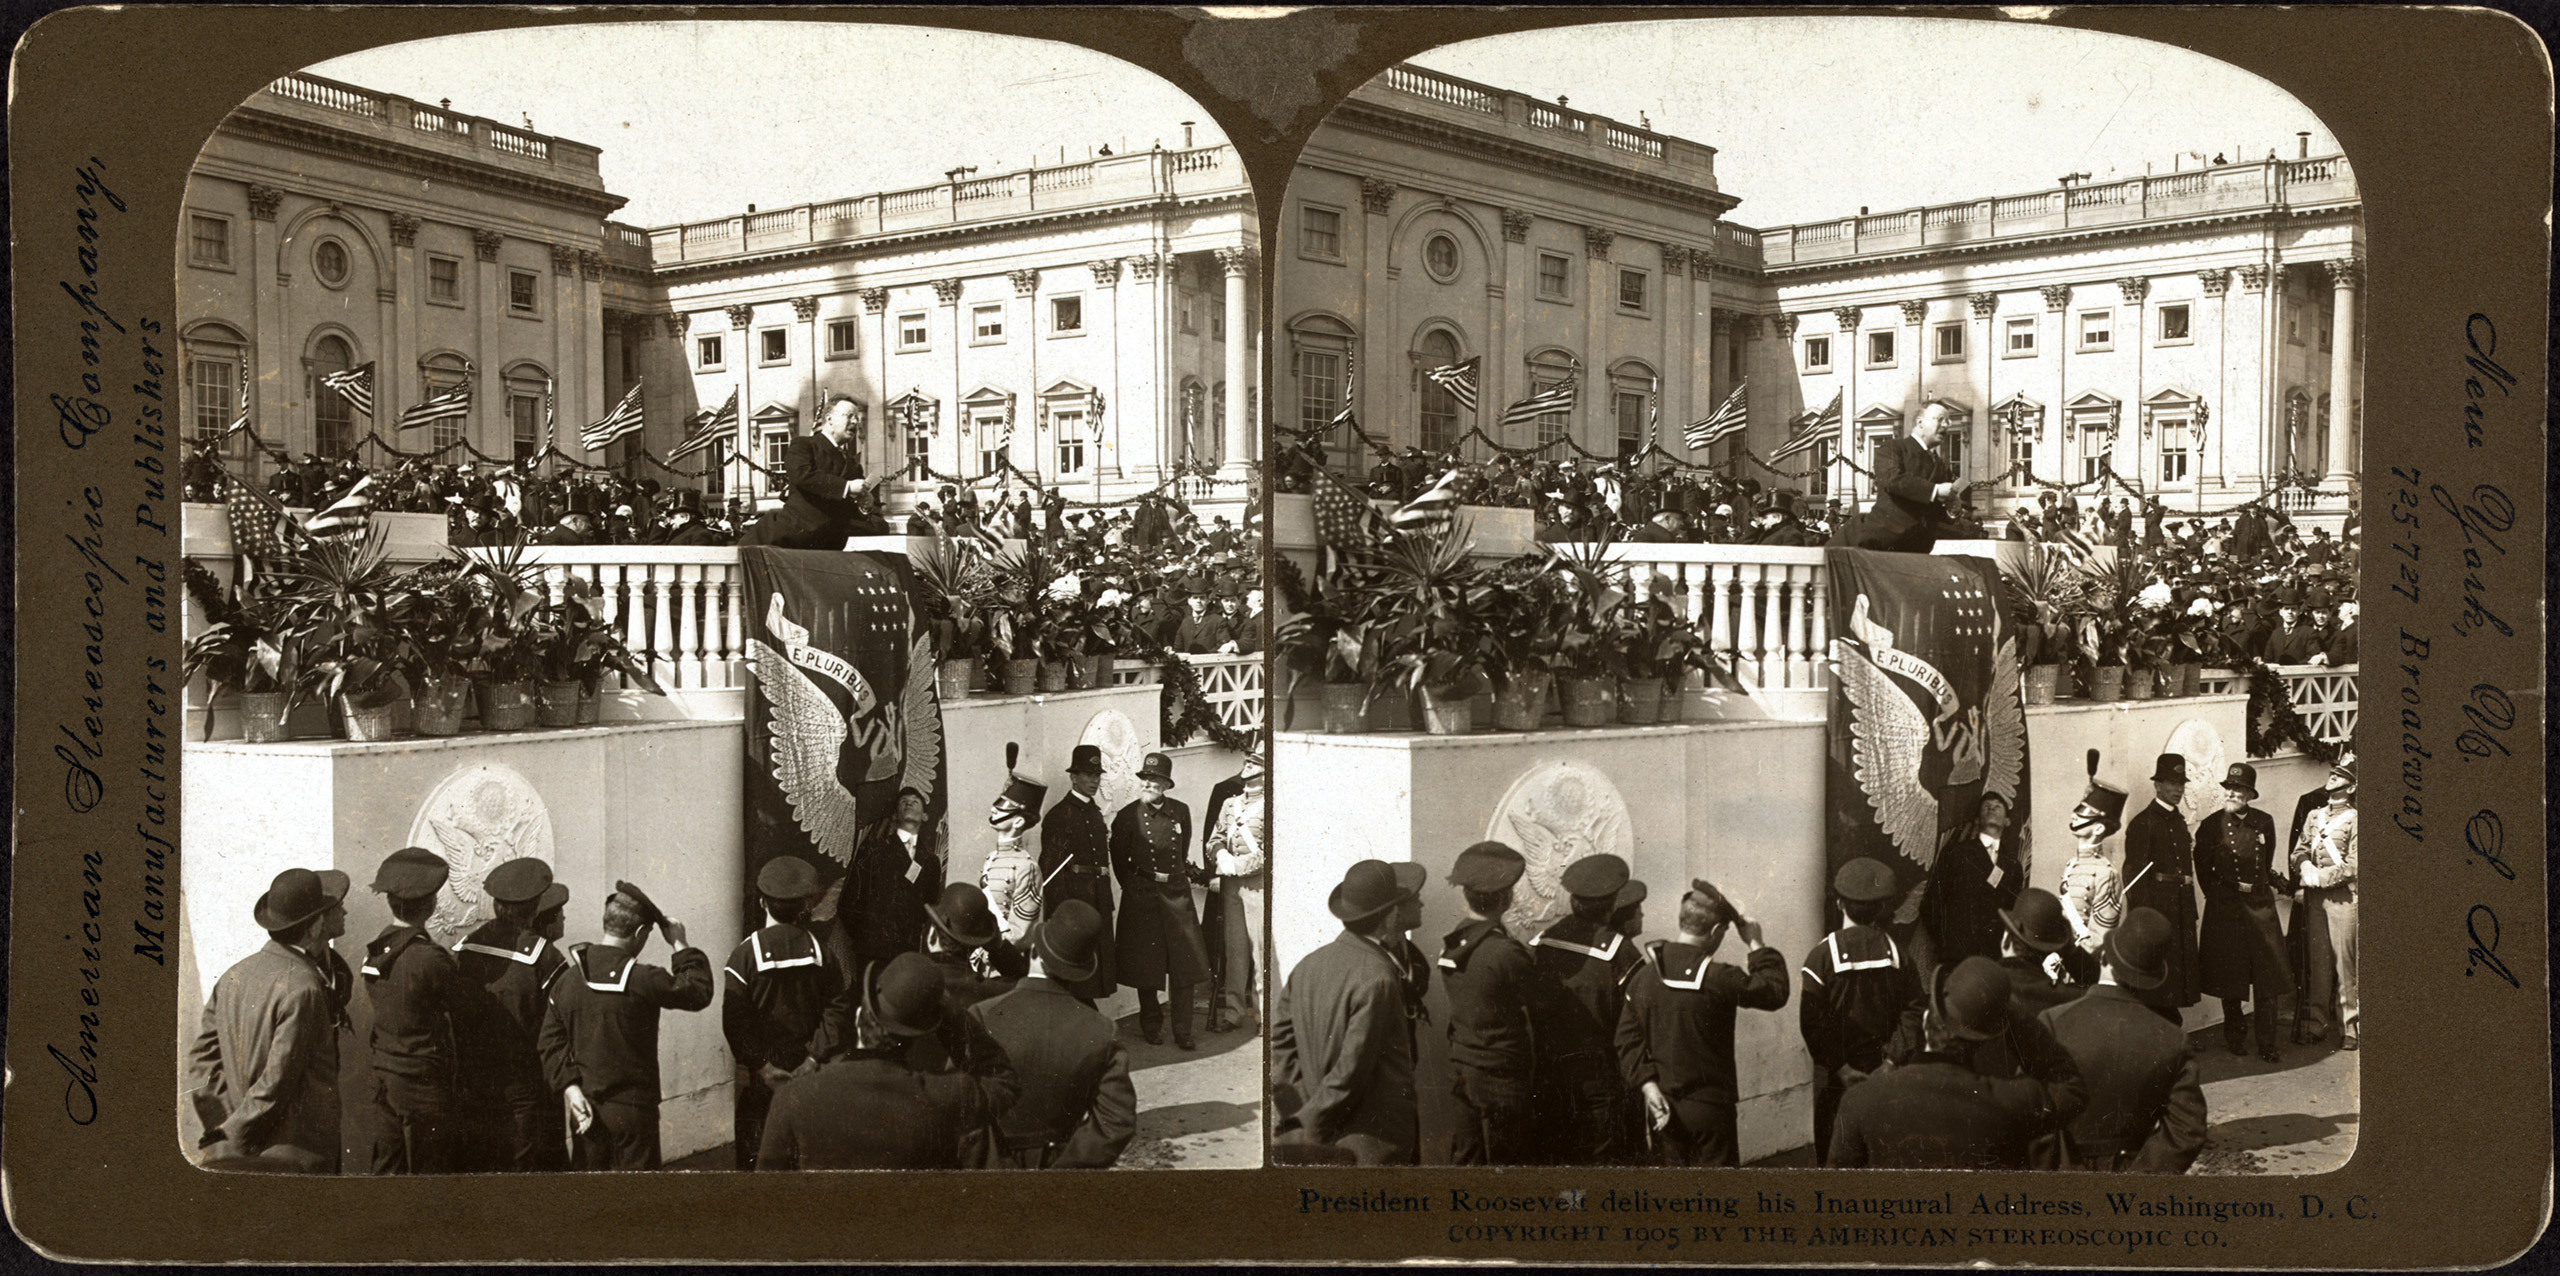 President Theodore Roosevelt delivering his inaugural address, Washington, D.C., 1905.